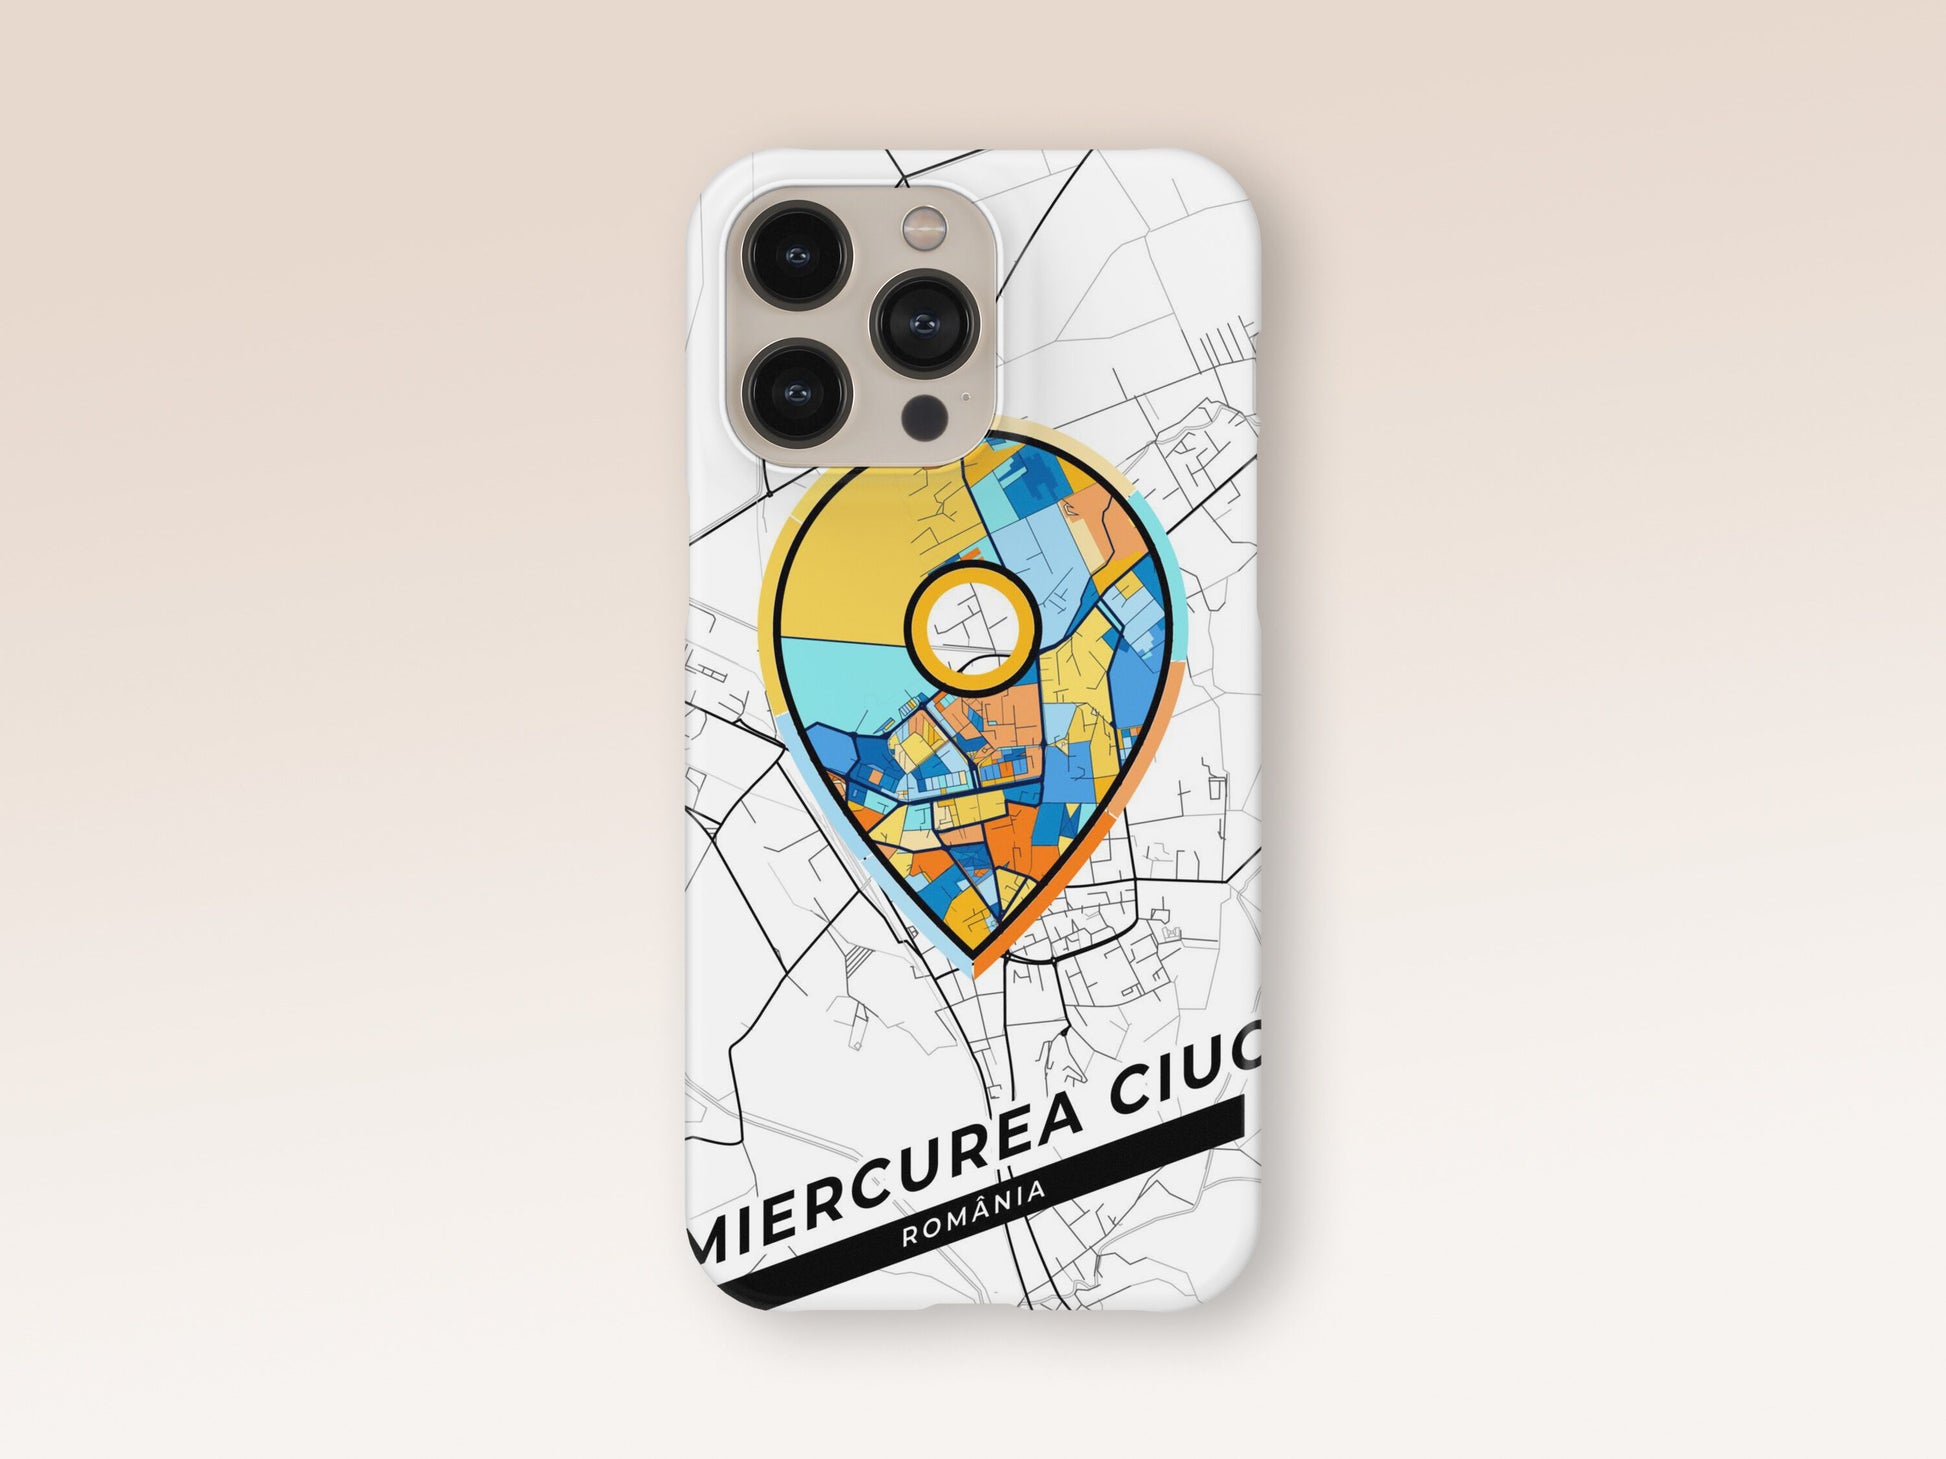 Miercurea Ciuc Romania slim phone case with colorful icon. Birthday, wedding or housewarming gift. Couple match cases. 1